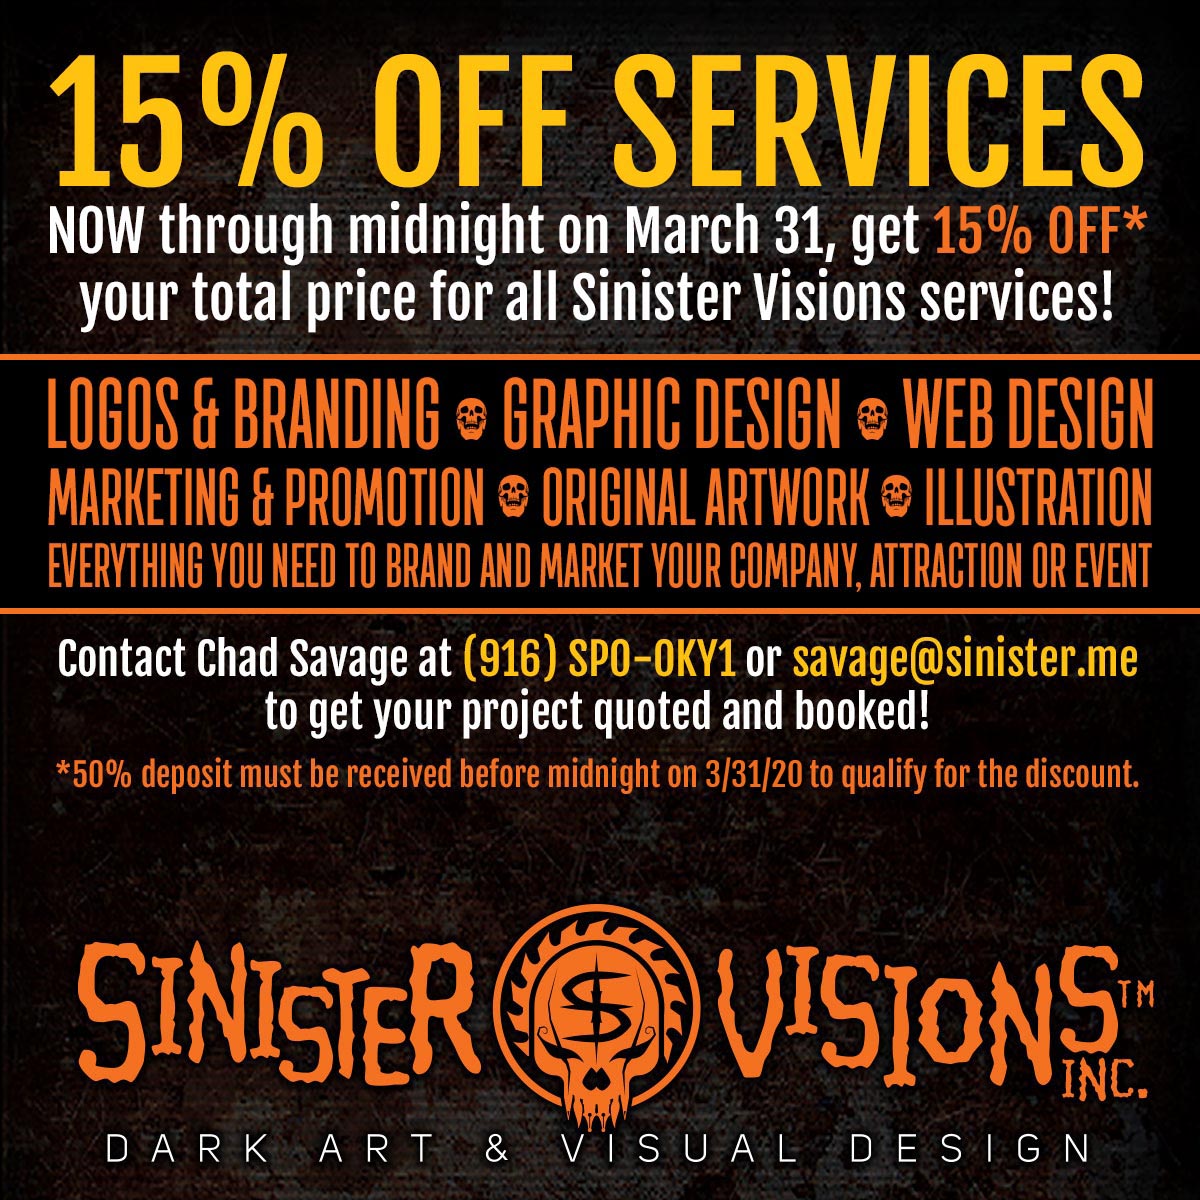 Sinister Visions Services Sale